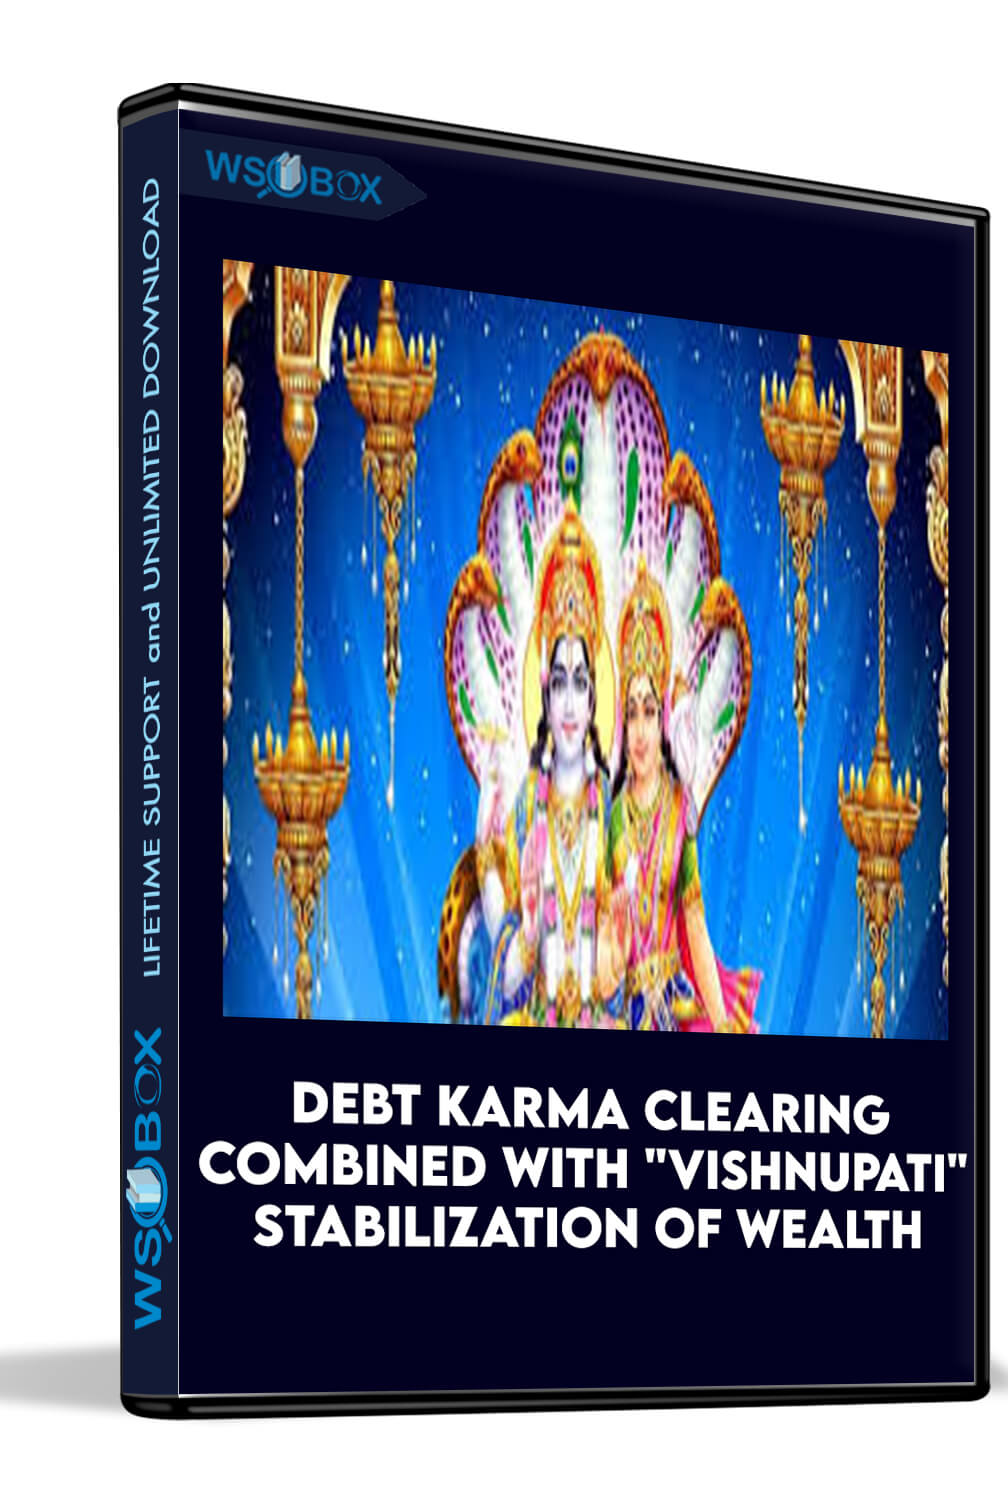 Debt Karma Clearing combined with "Vishnupati" Stabilization of Wealth and Business Group Clearing Recording